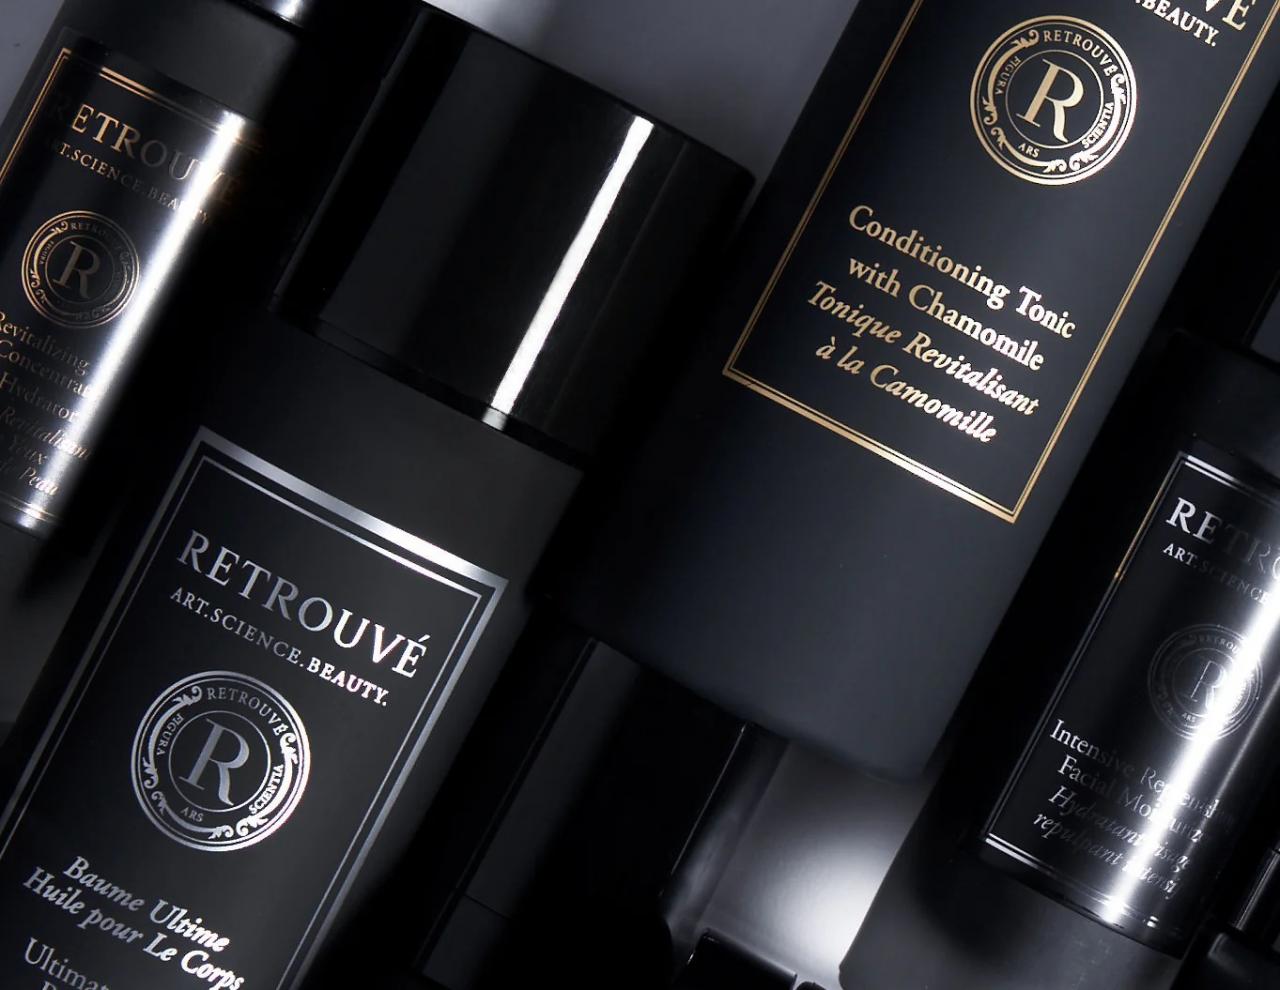 Retrouve Skincare, Discover the Science of Beauty